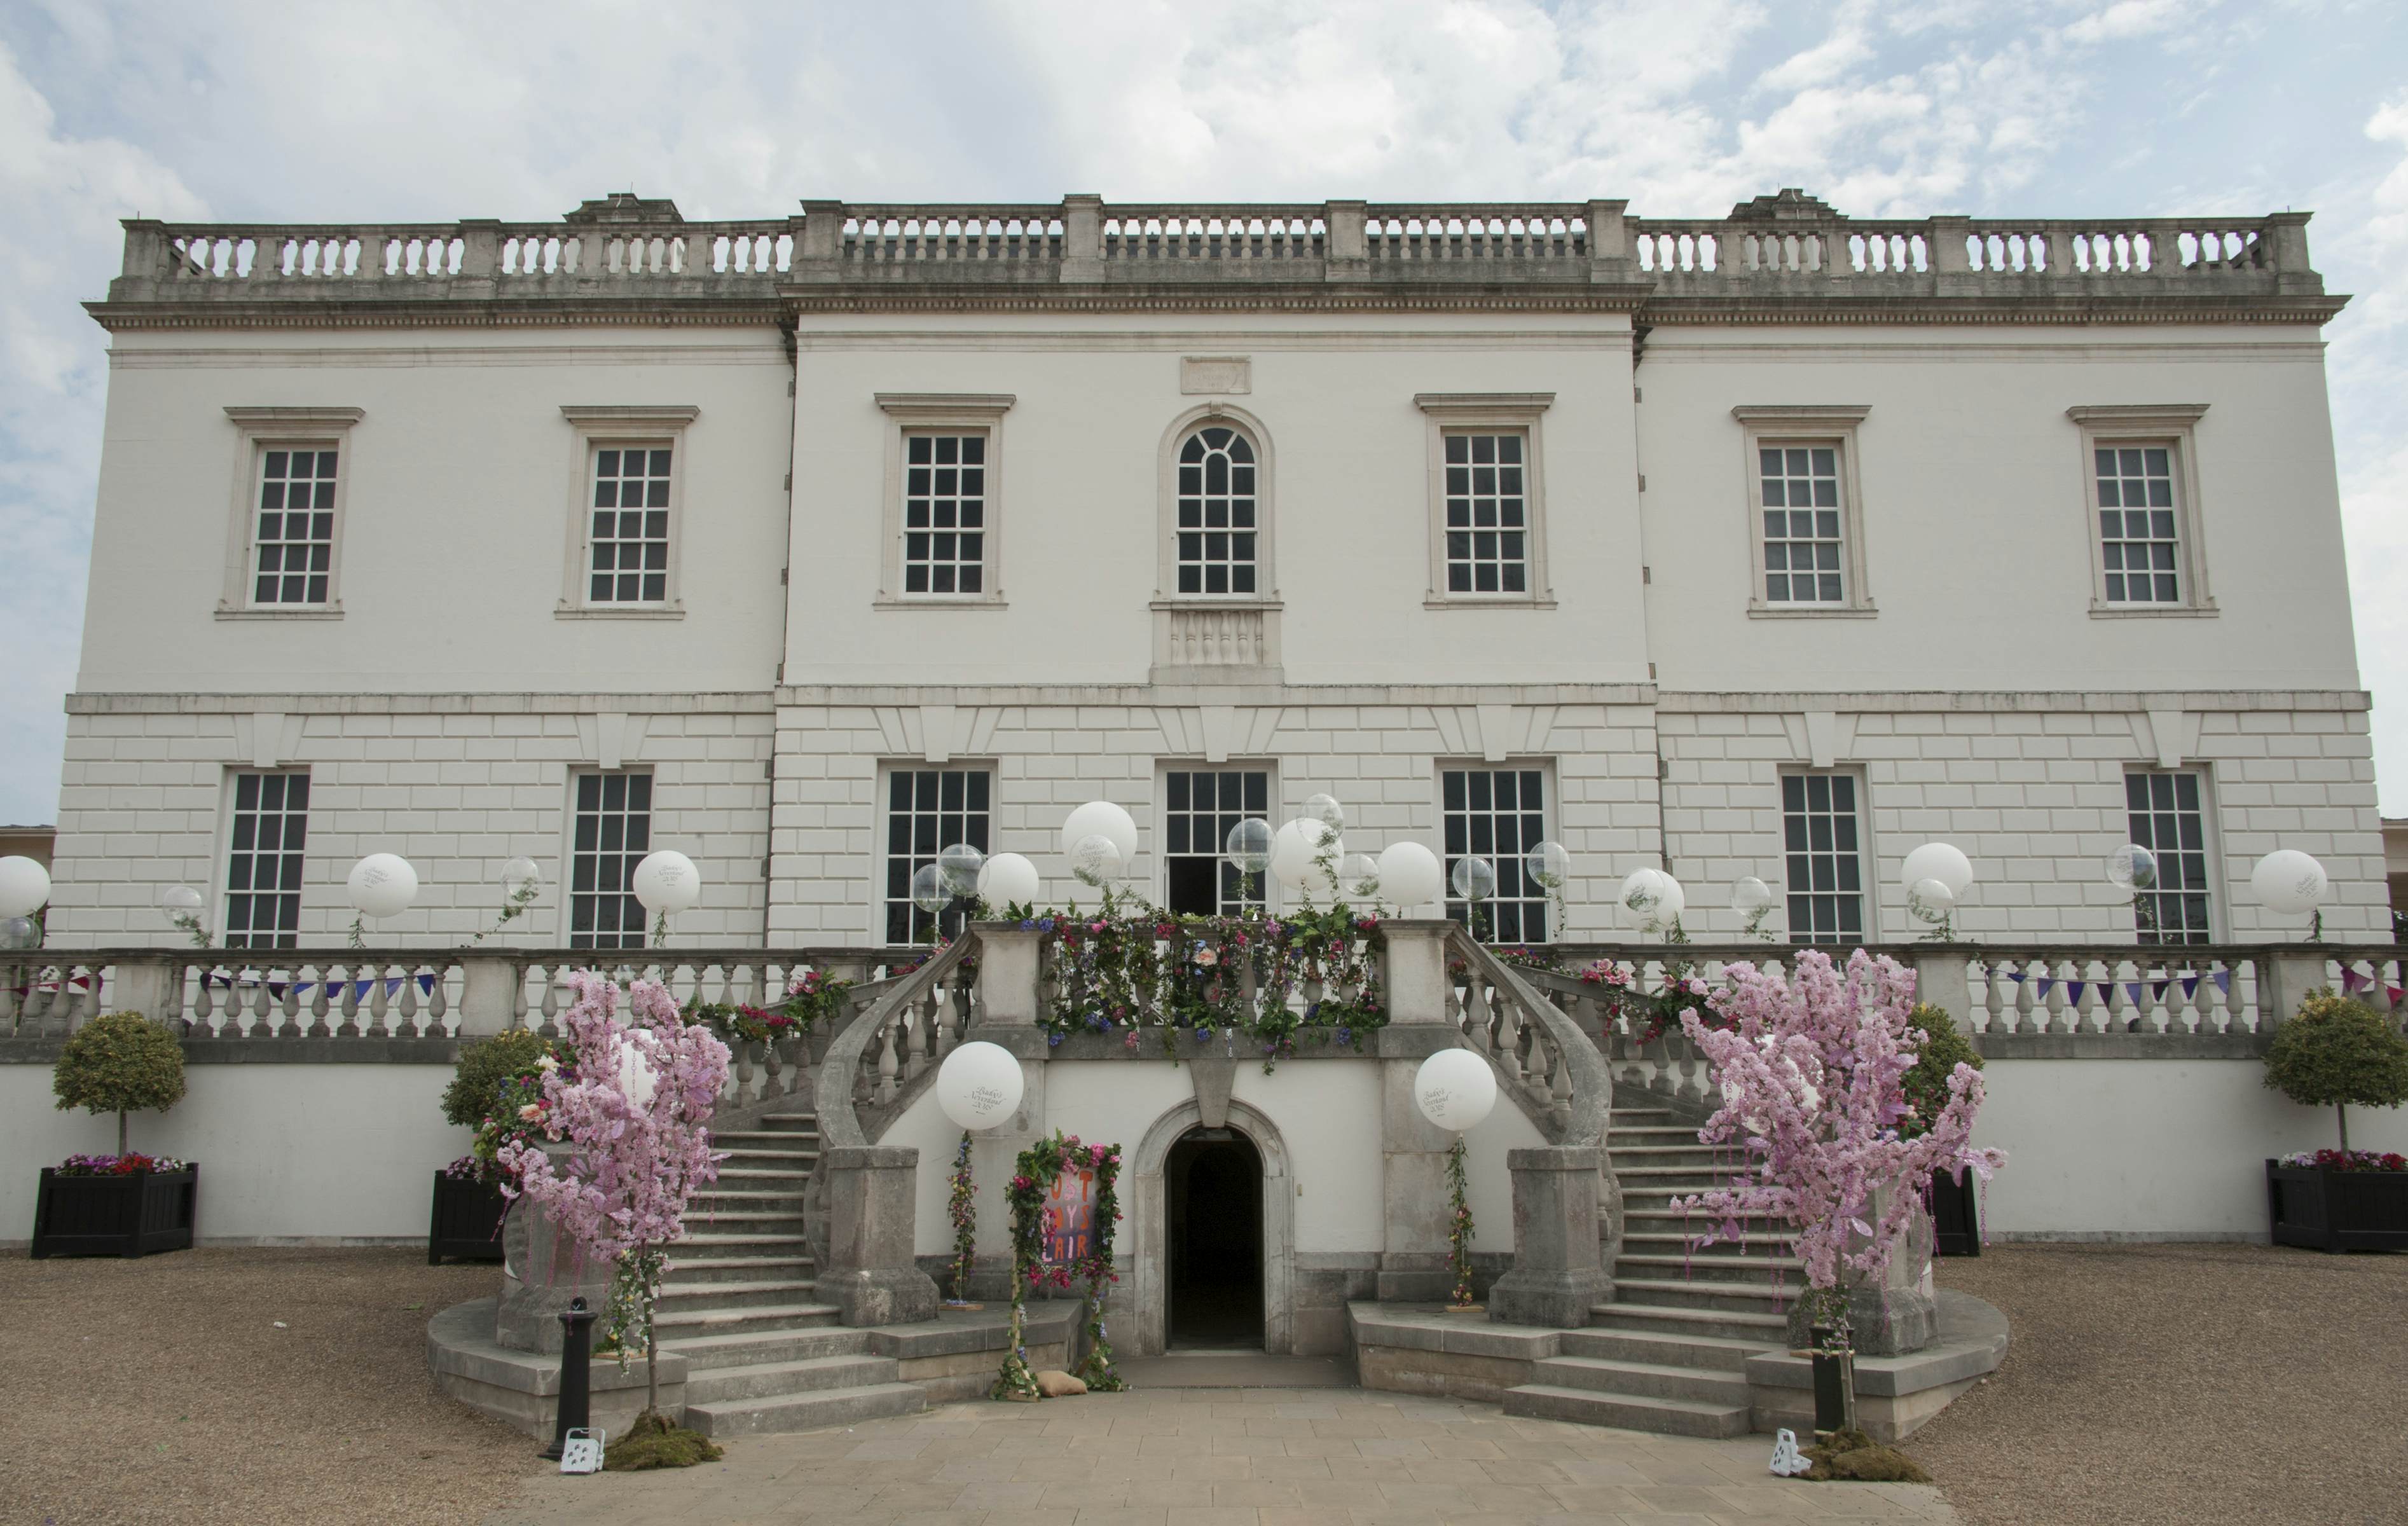 The Queen's House - image